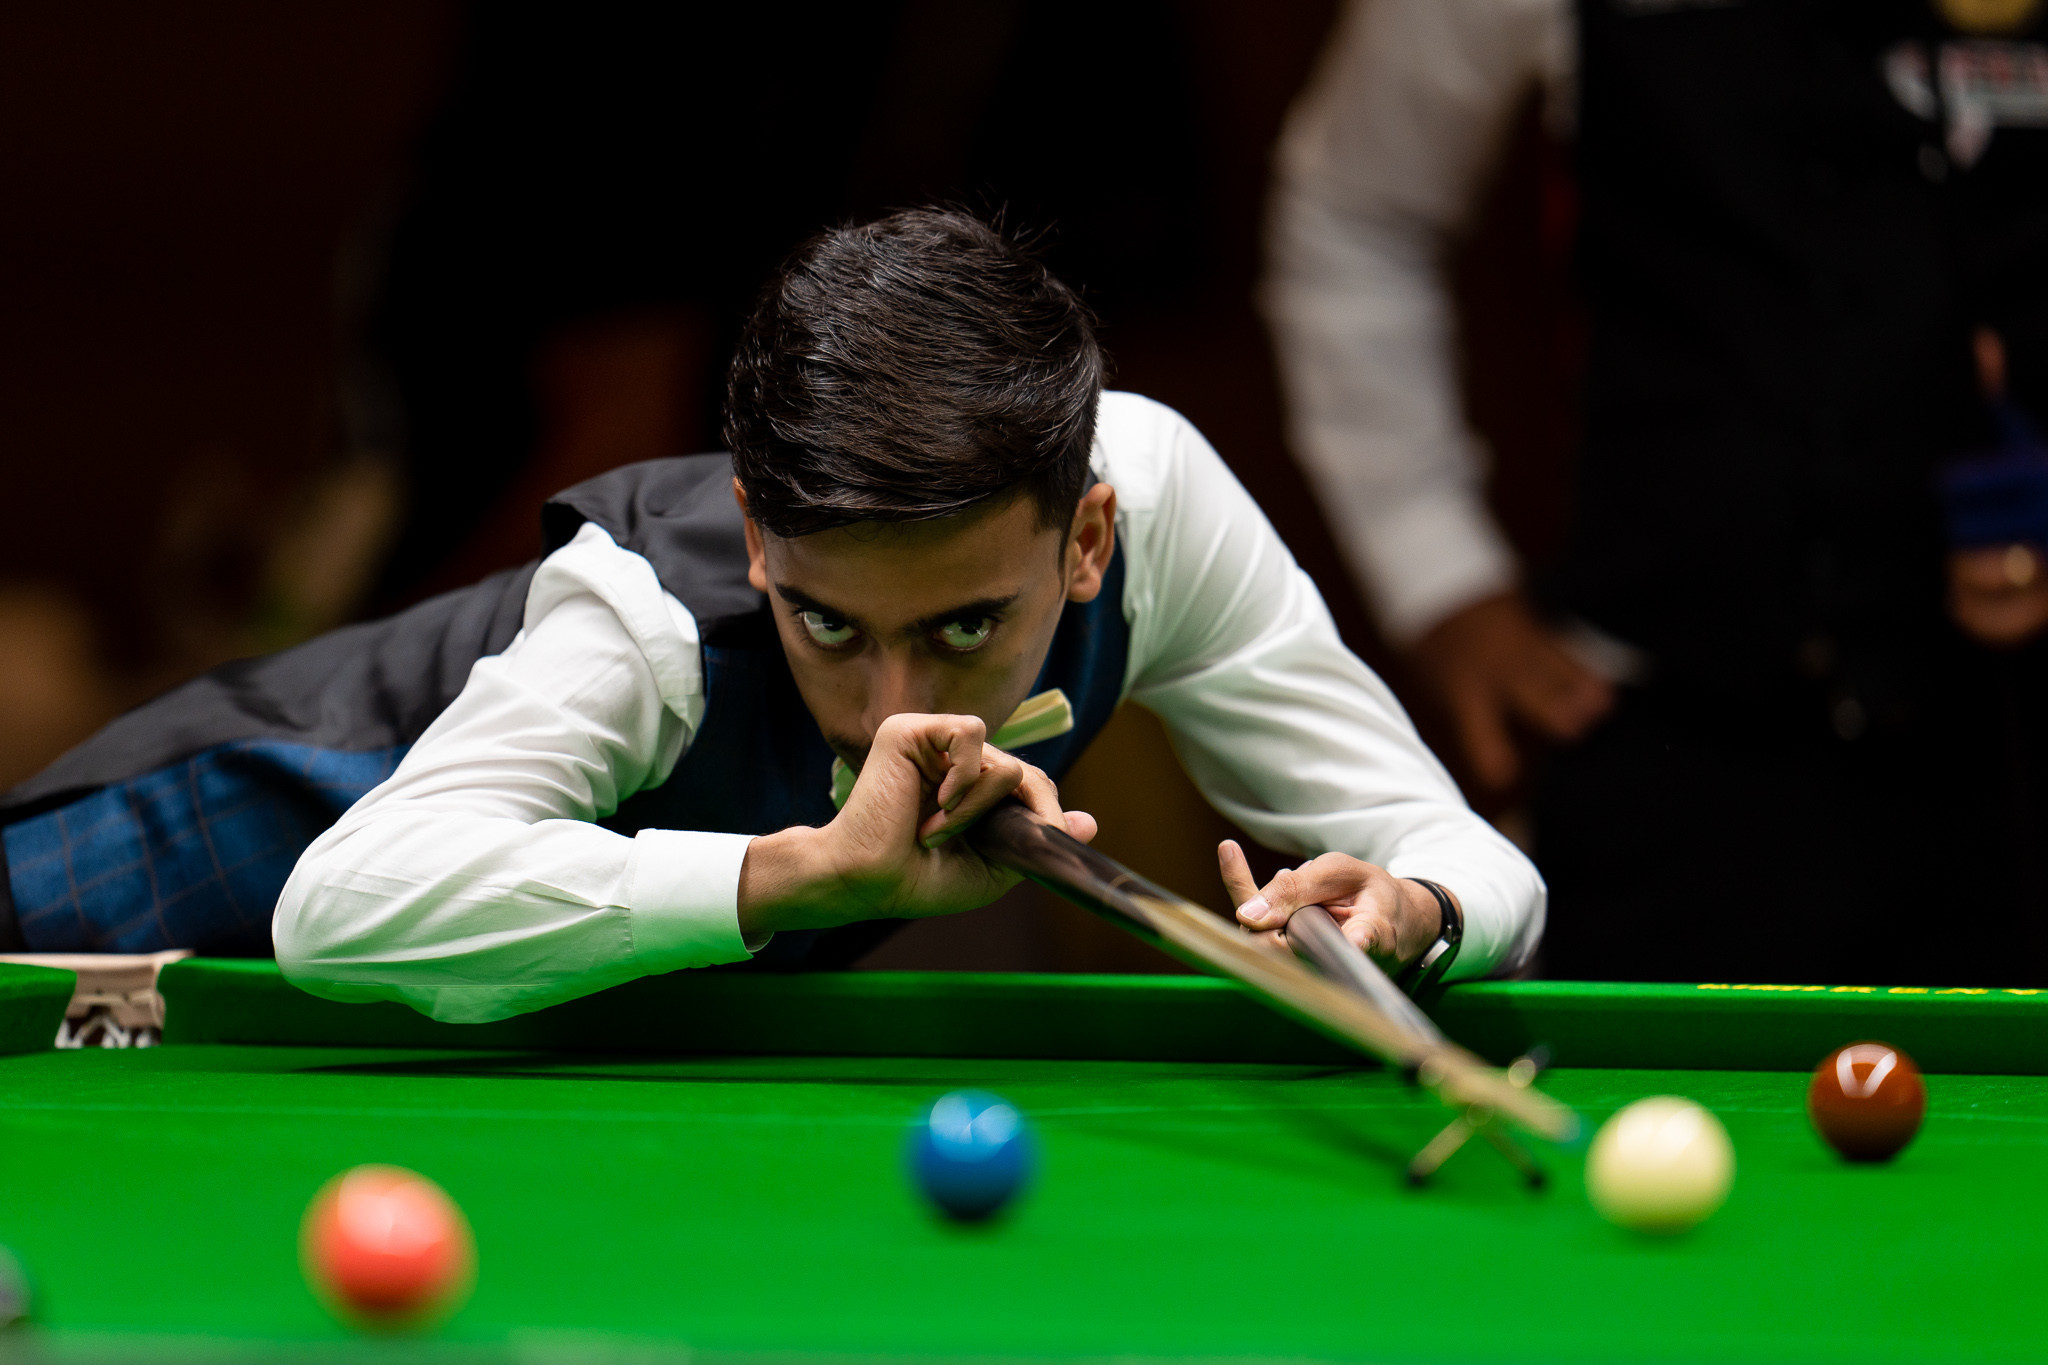 Pakistan's Ahsan Ramzan started the men's snooker tournament with a 3-1 win against the US' Ahmed Aly Elsayed ©Kyle Schwab/Dustin Massey Studios/The World Games 2022